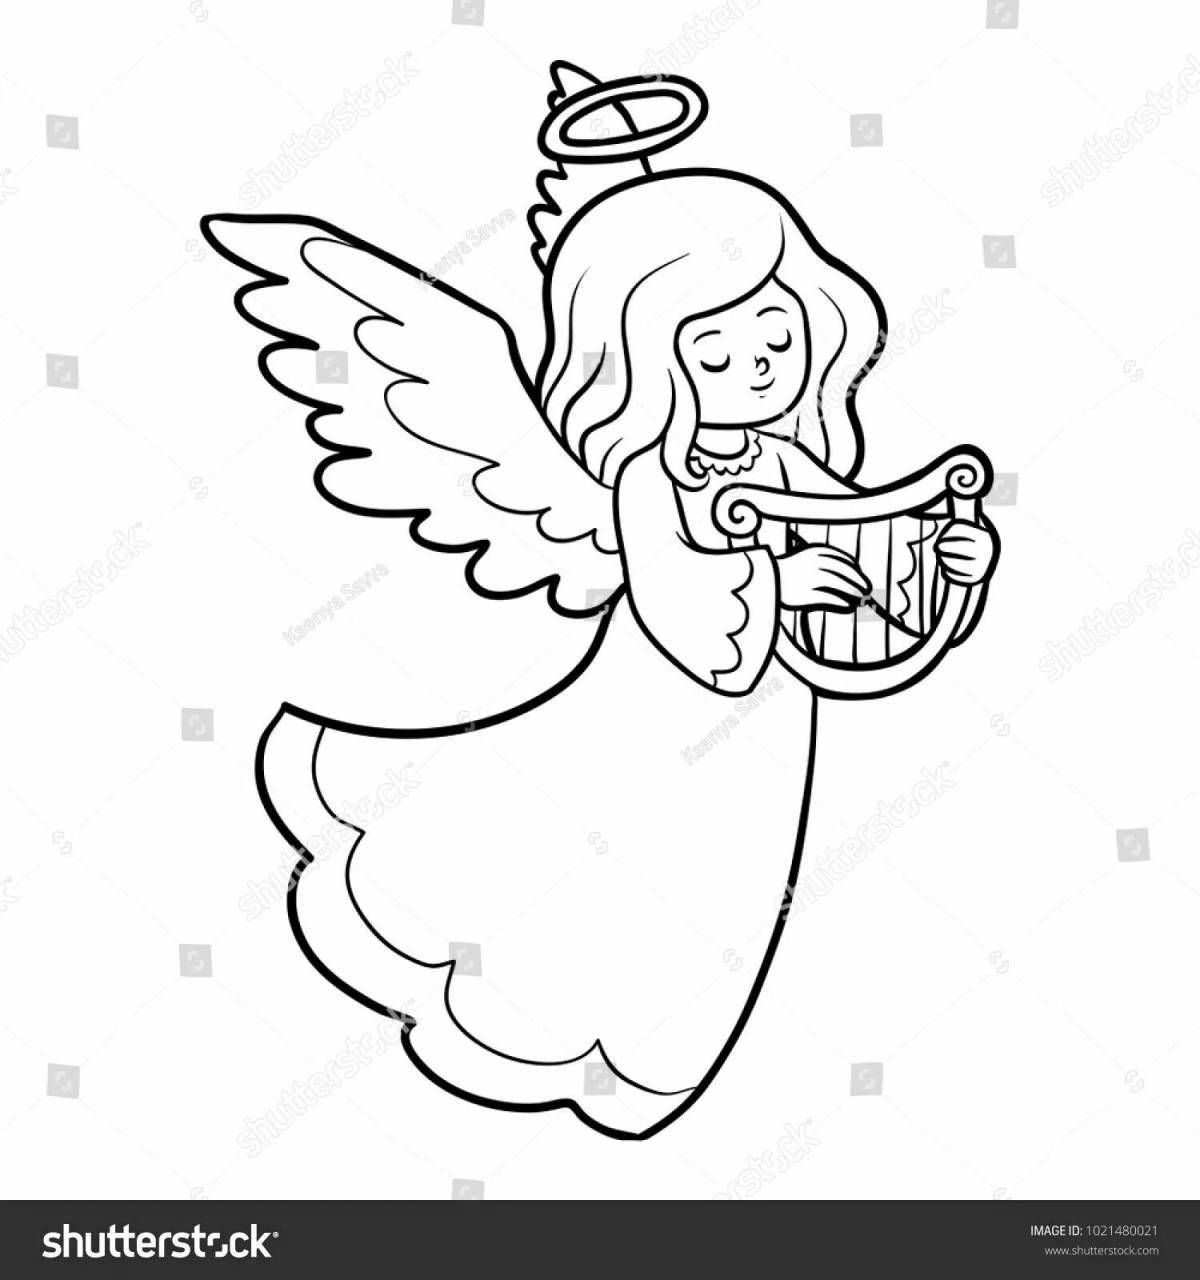 Angel with wings for kids #1